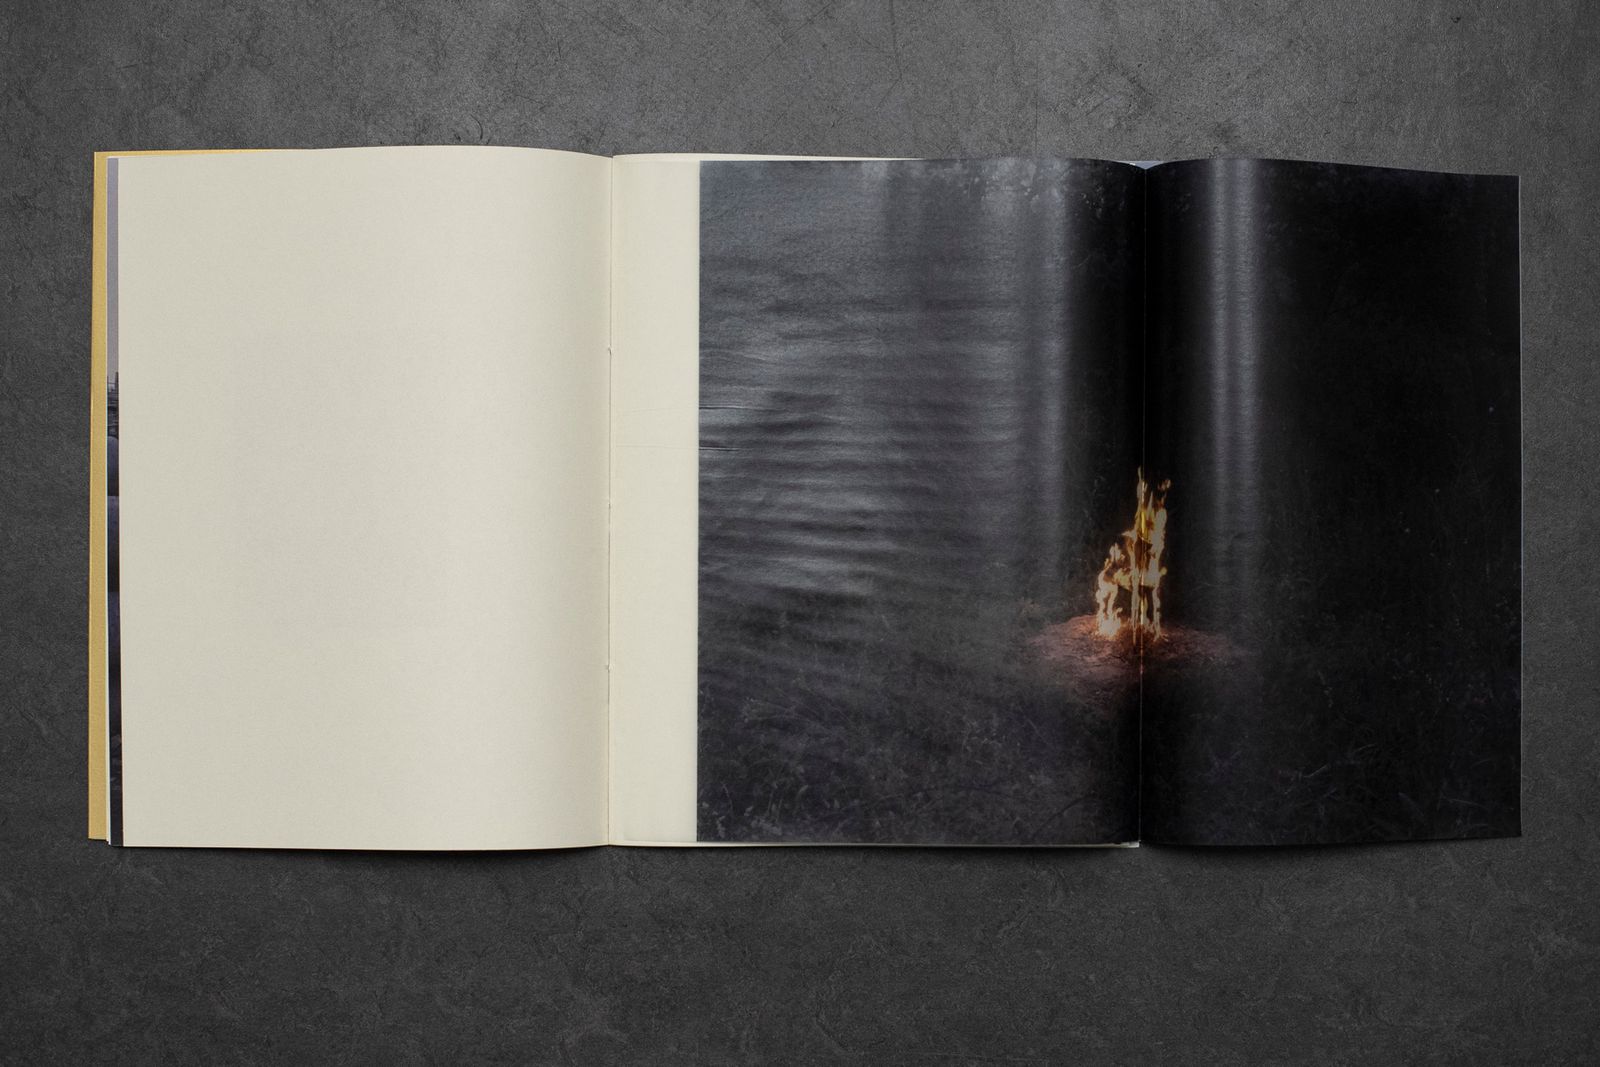 © Leporello Books - Image from the FINISTERRAE by Michele Palazzi photography project